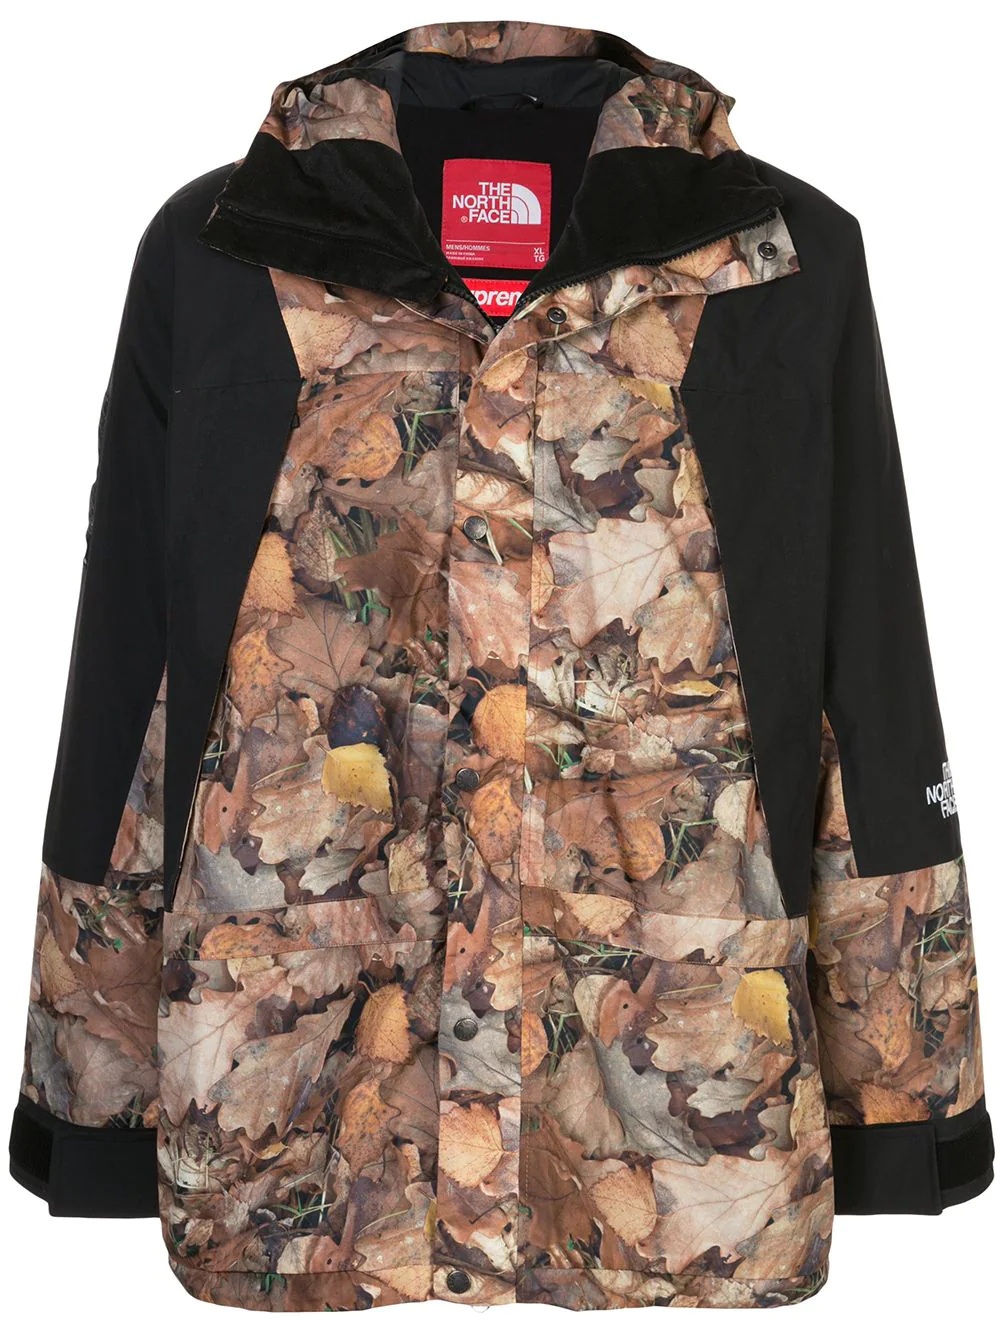 x The North Face Mountain Light jacket - 1